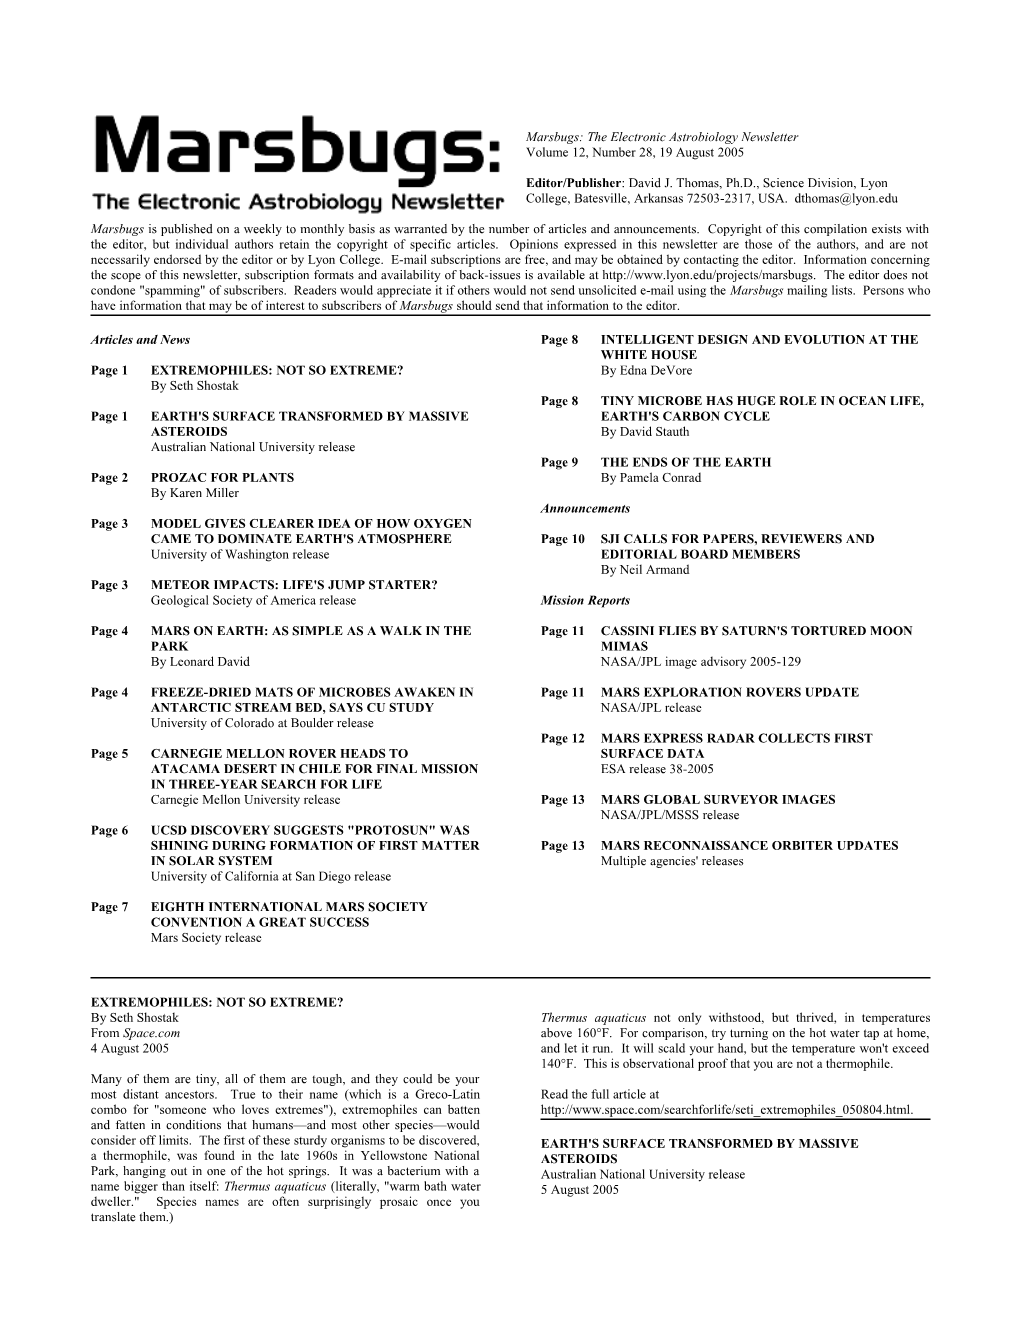 Marsbugs: the Electronic Astrobiology Newsletter , Volume 12, Number 28, 19 August 2005